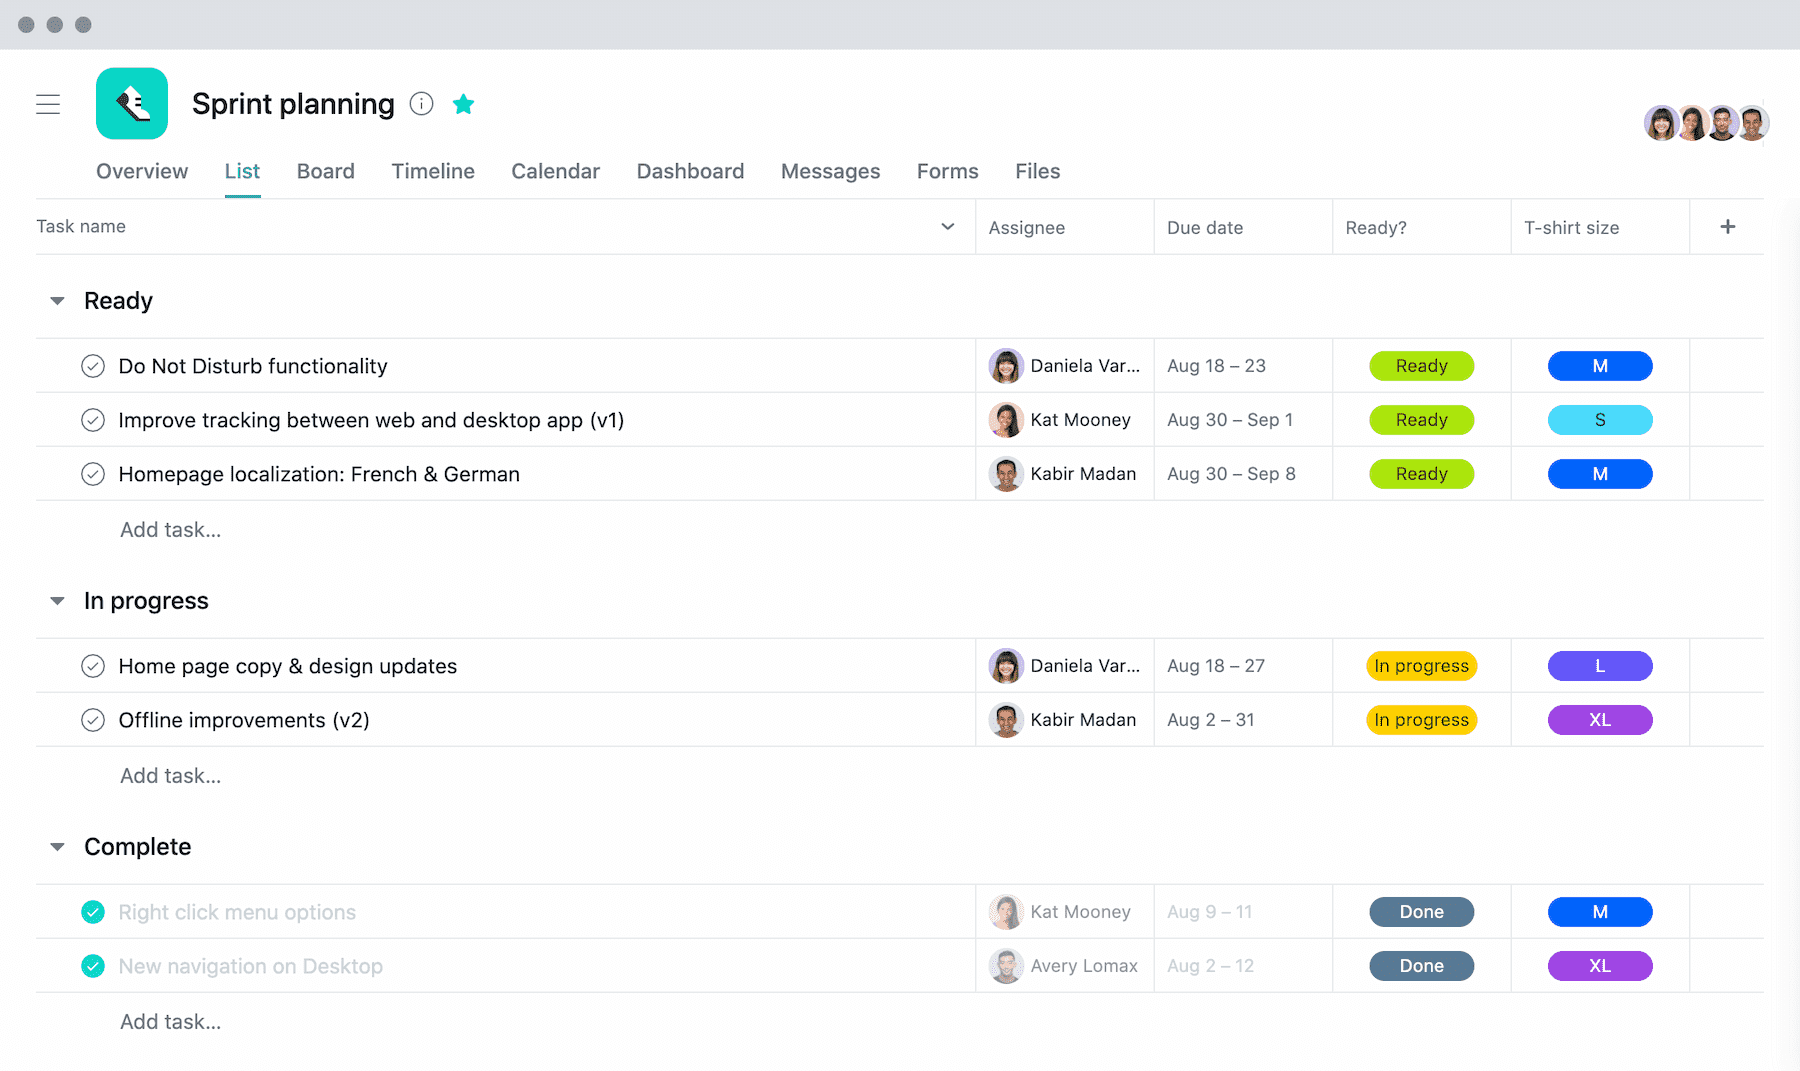 [Product UI] Sprint planning project with t-shirt sizes in Asana (Lists)